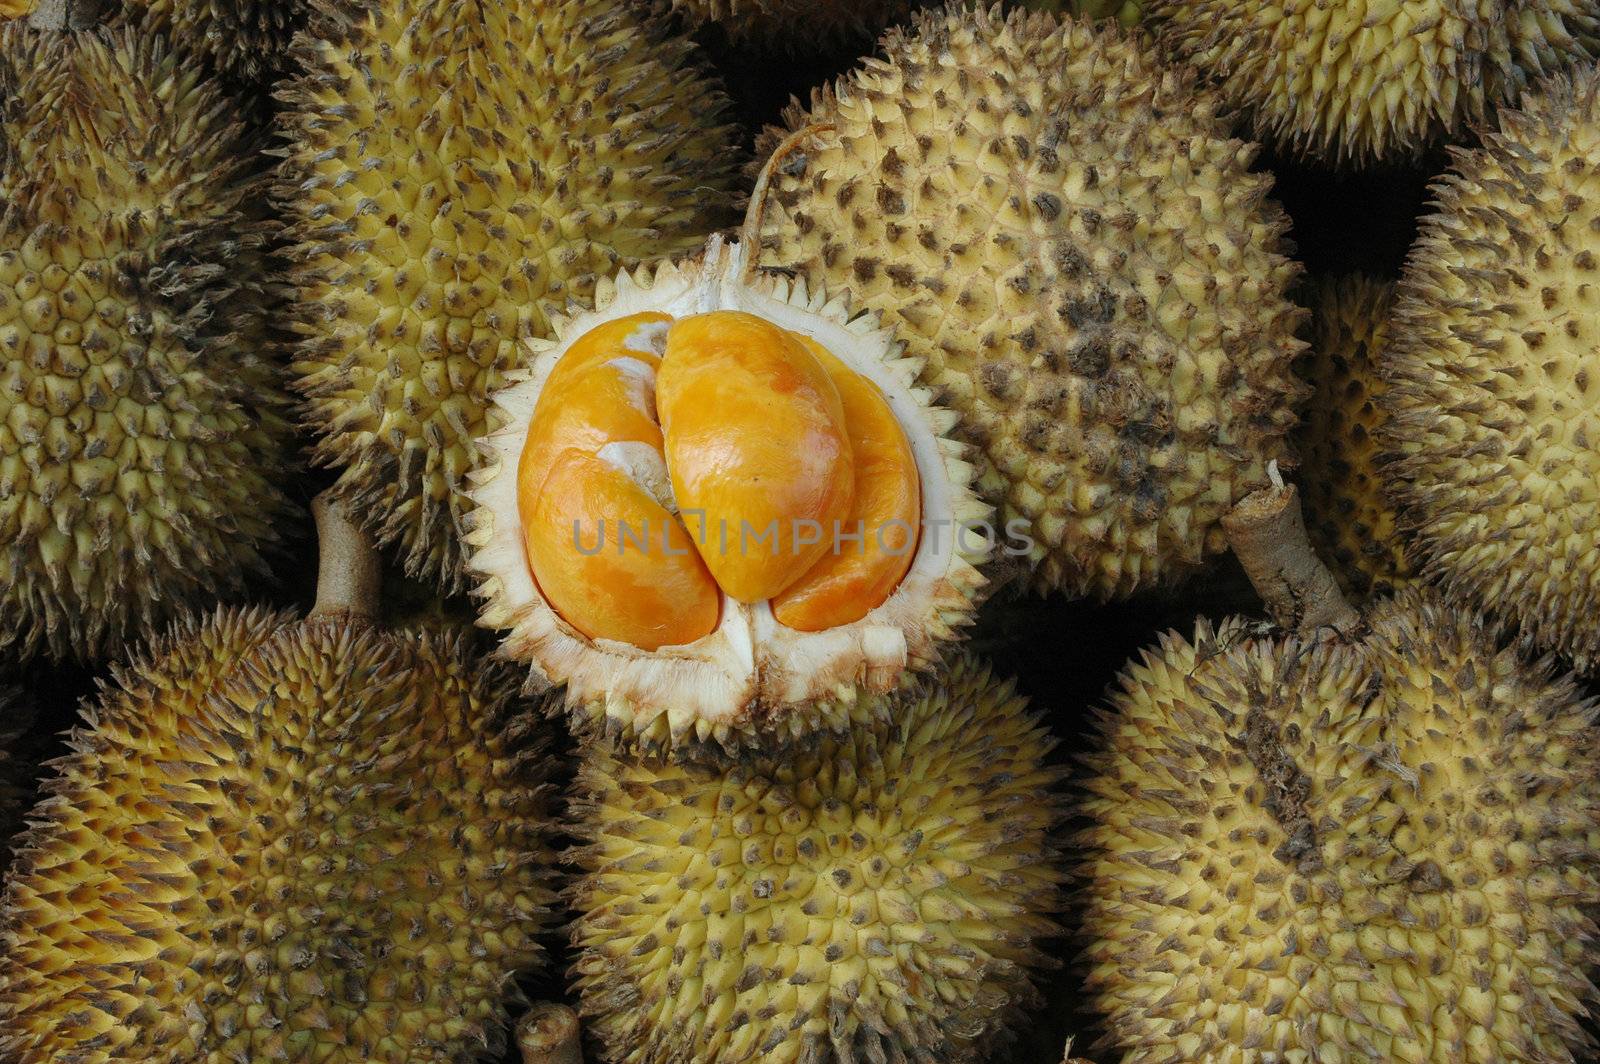 tropical fruits like durian fruit, with smaller size and yellow tropical fruit that is found only in Borneo Indonesia